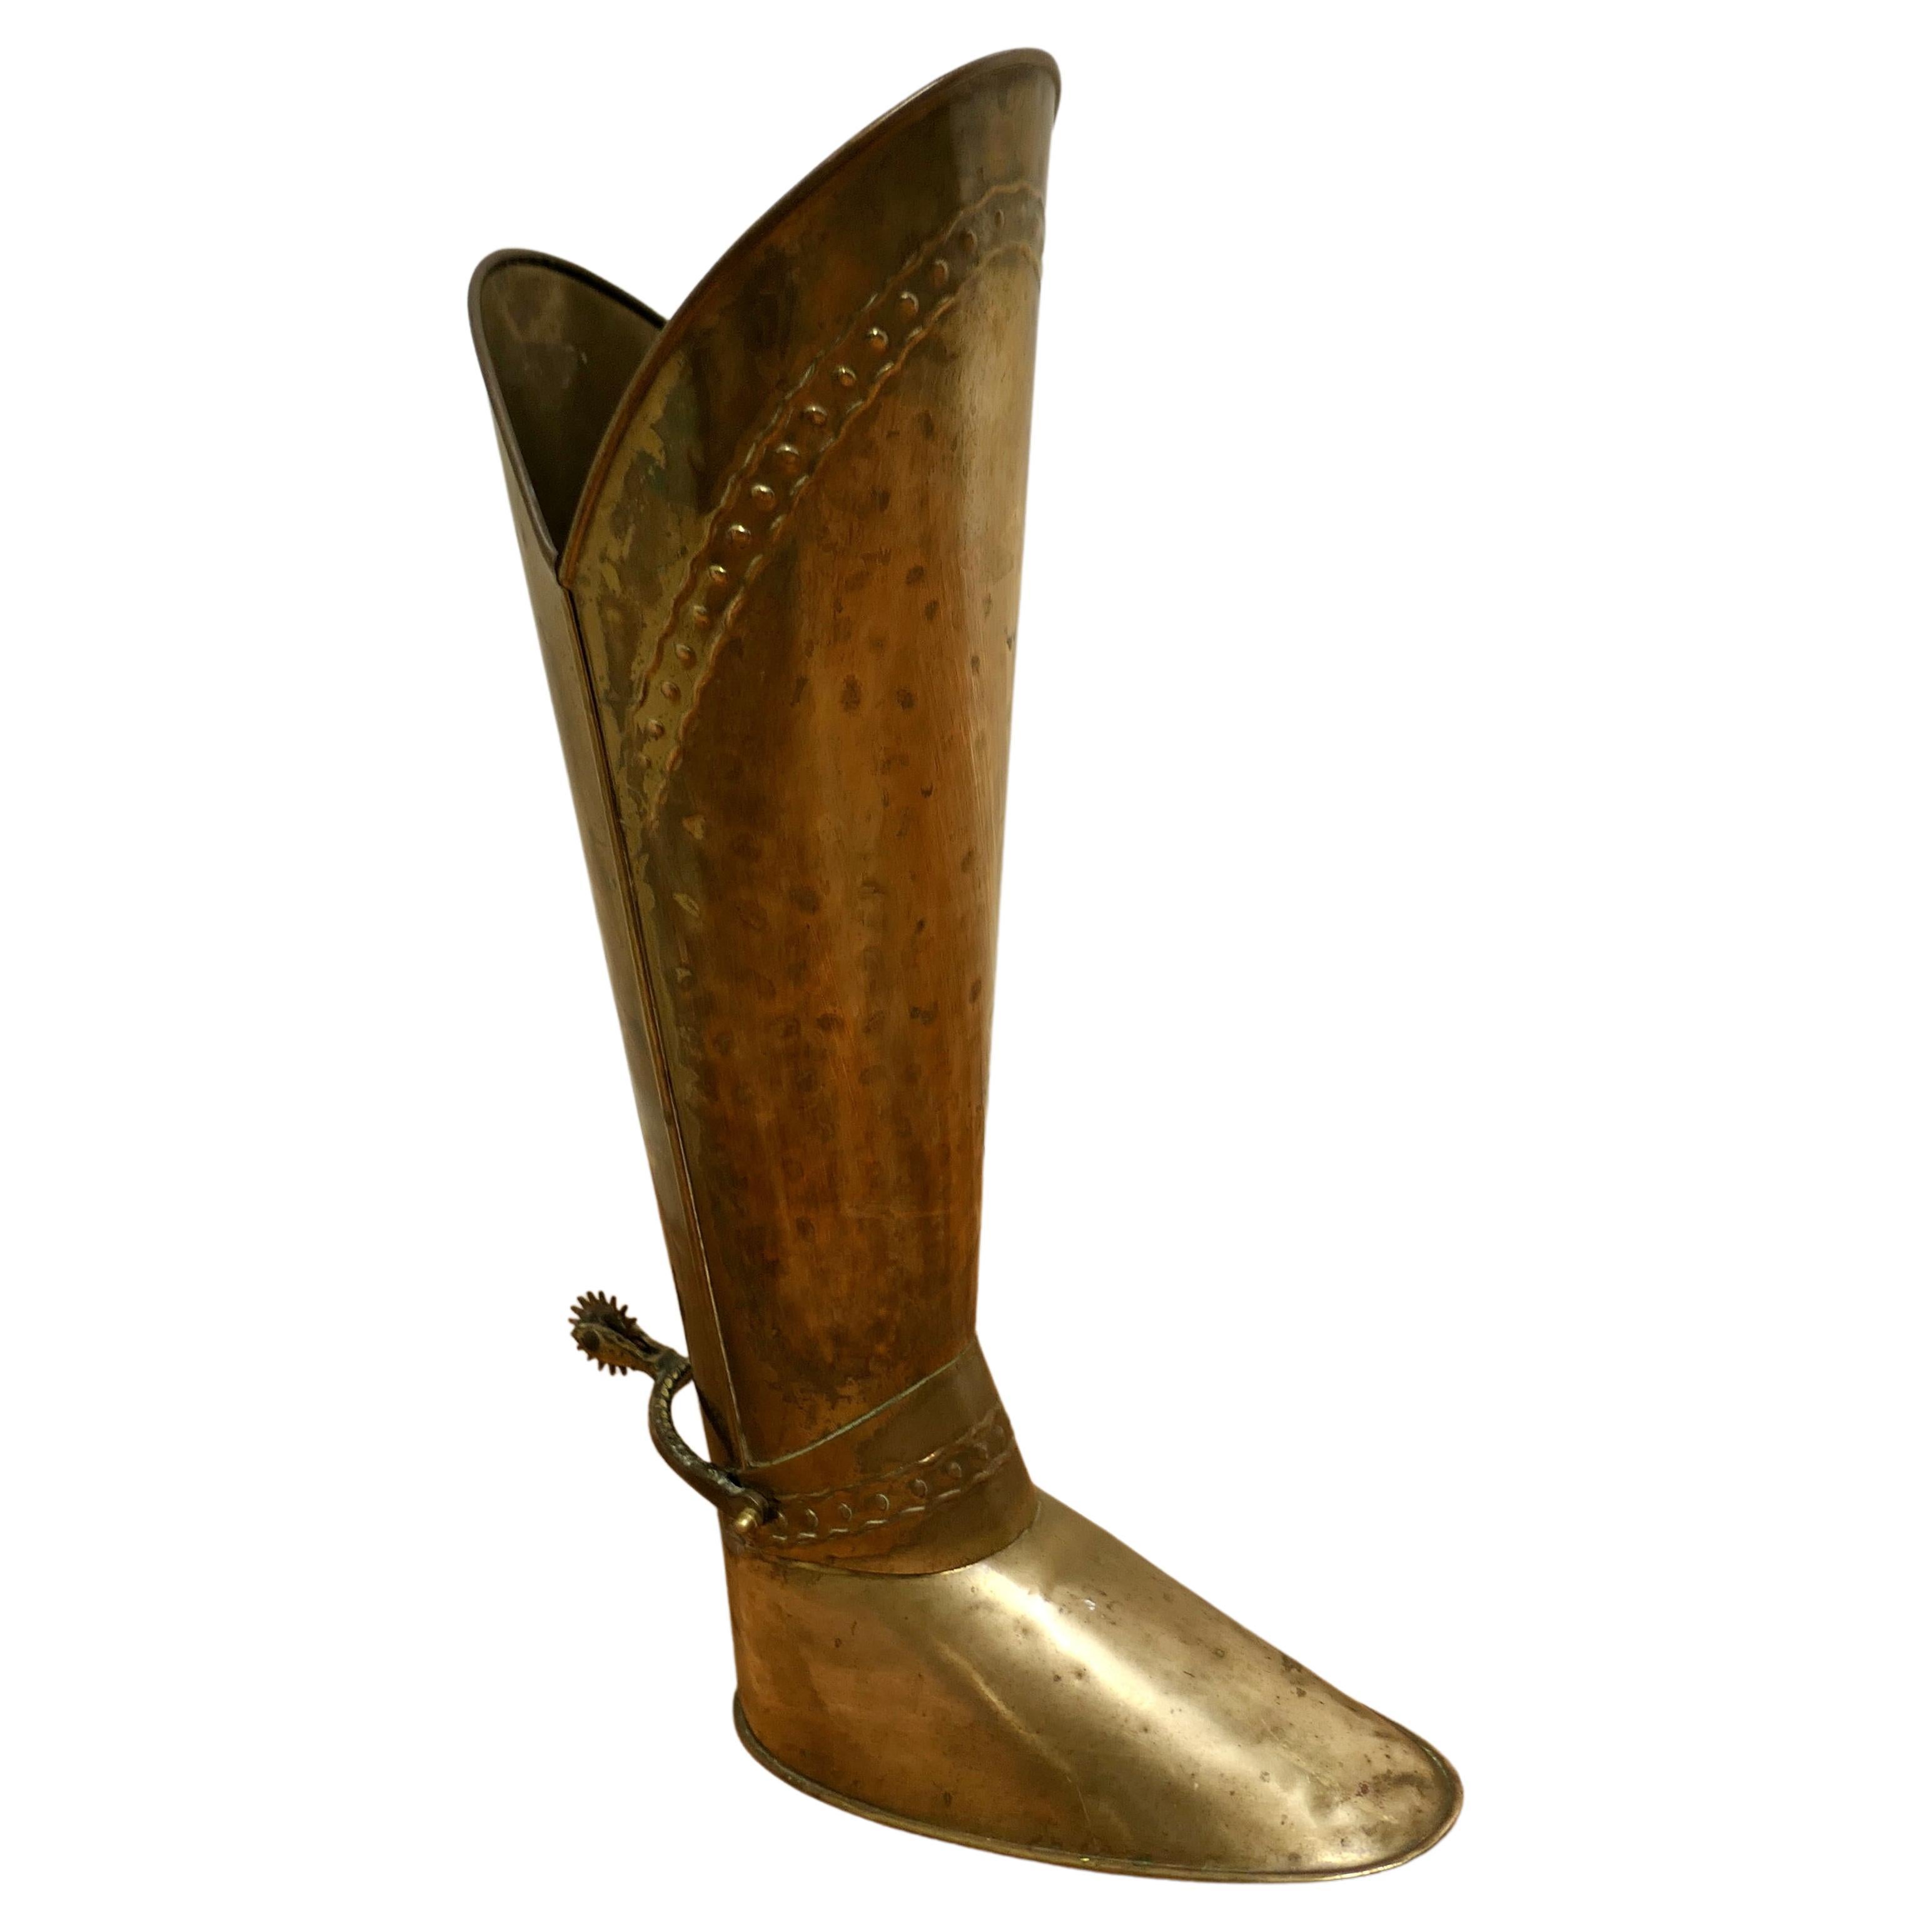 Unusual Stick Stand in the Form of a Brass Boot